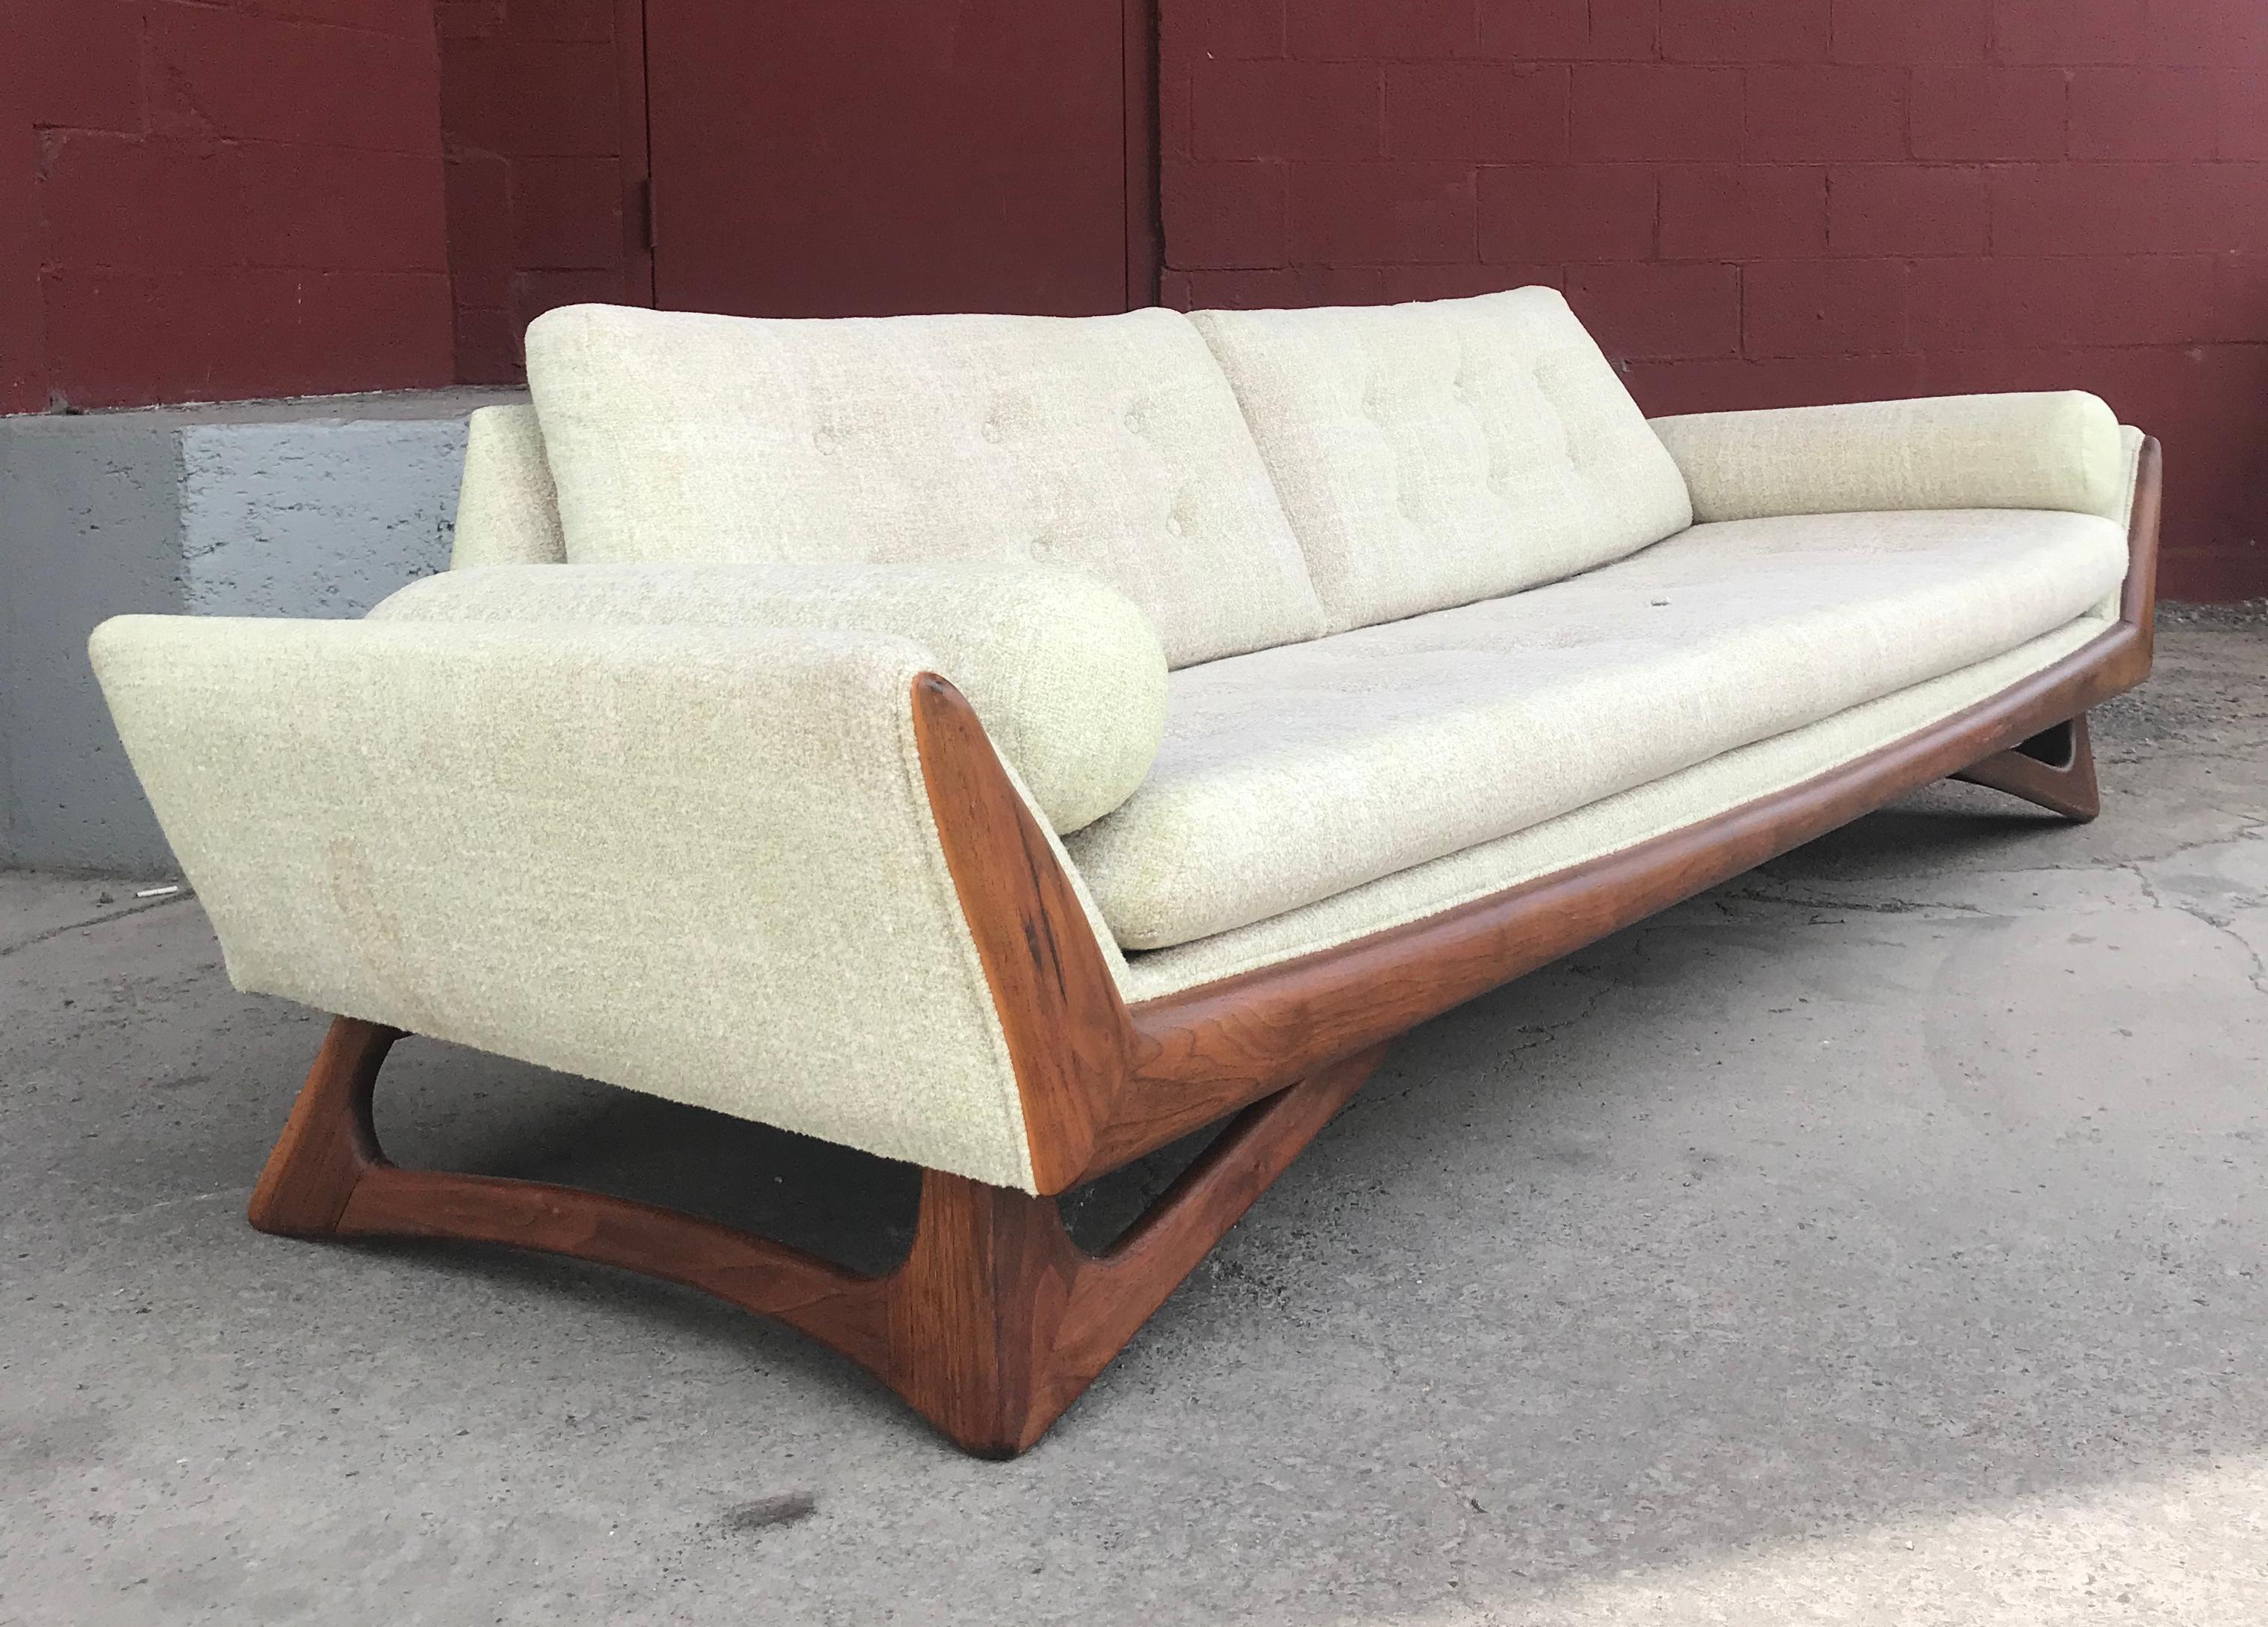 Upholstery Classic Mid-Century Modern Sofa Designed by Adrian Pearsall, Stunning